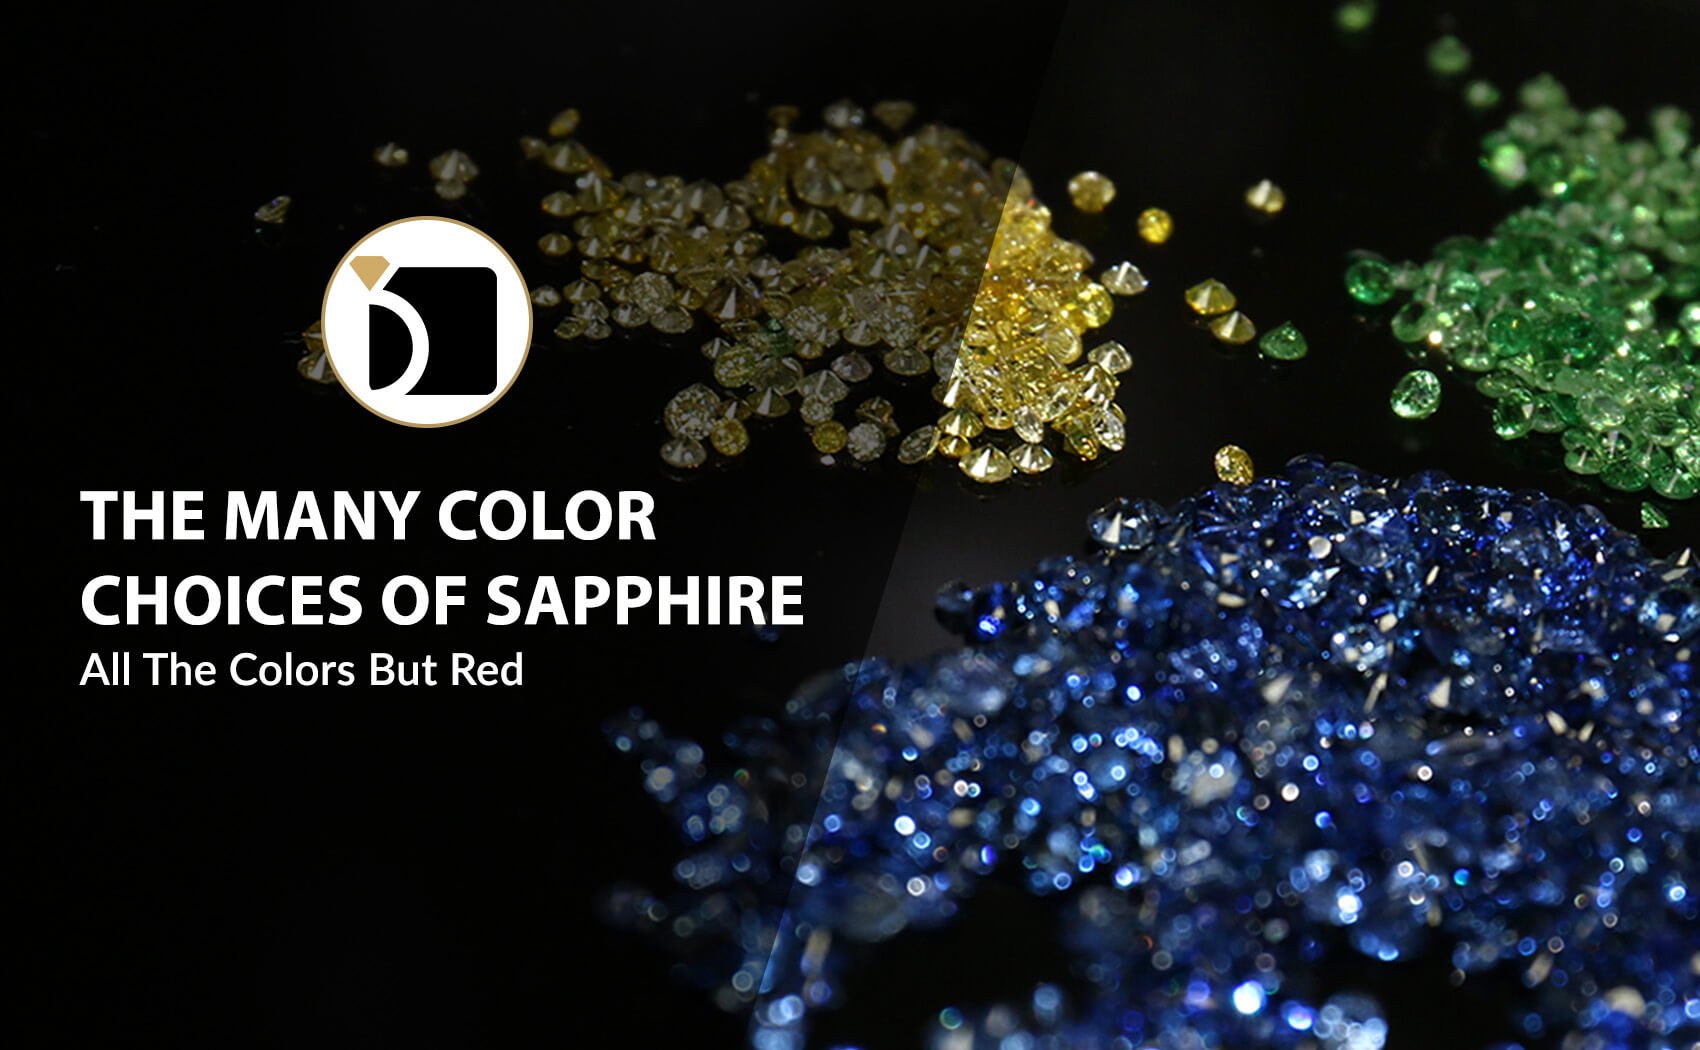 Image Showcasing Different Color Sapphire